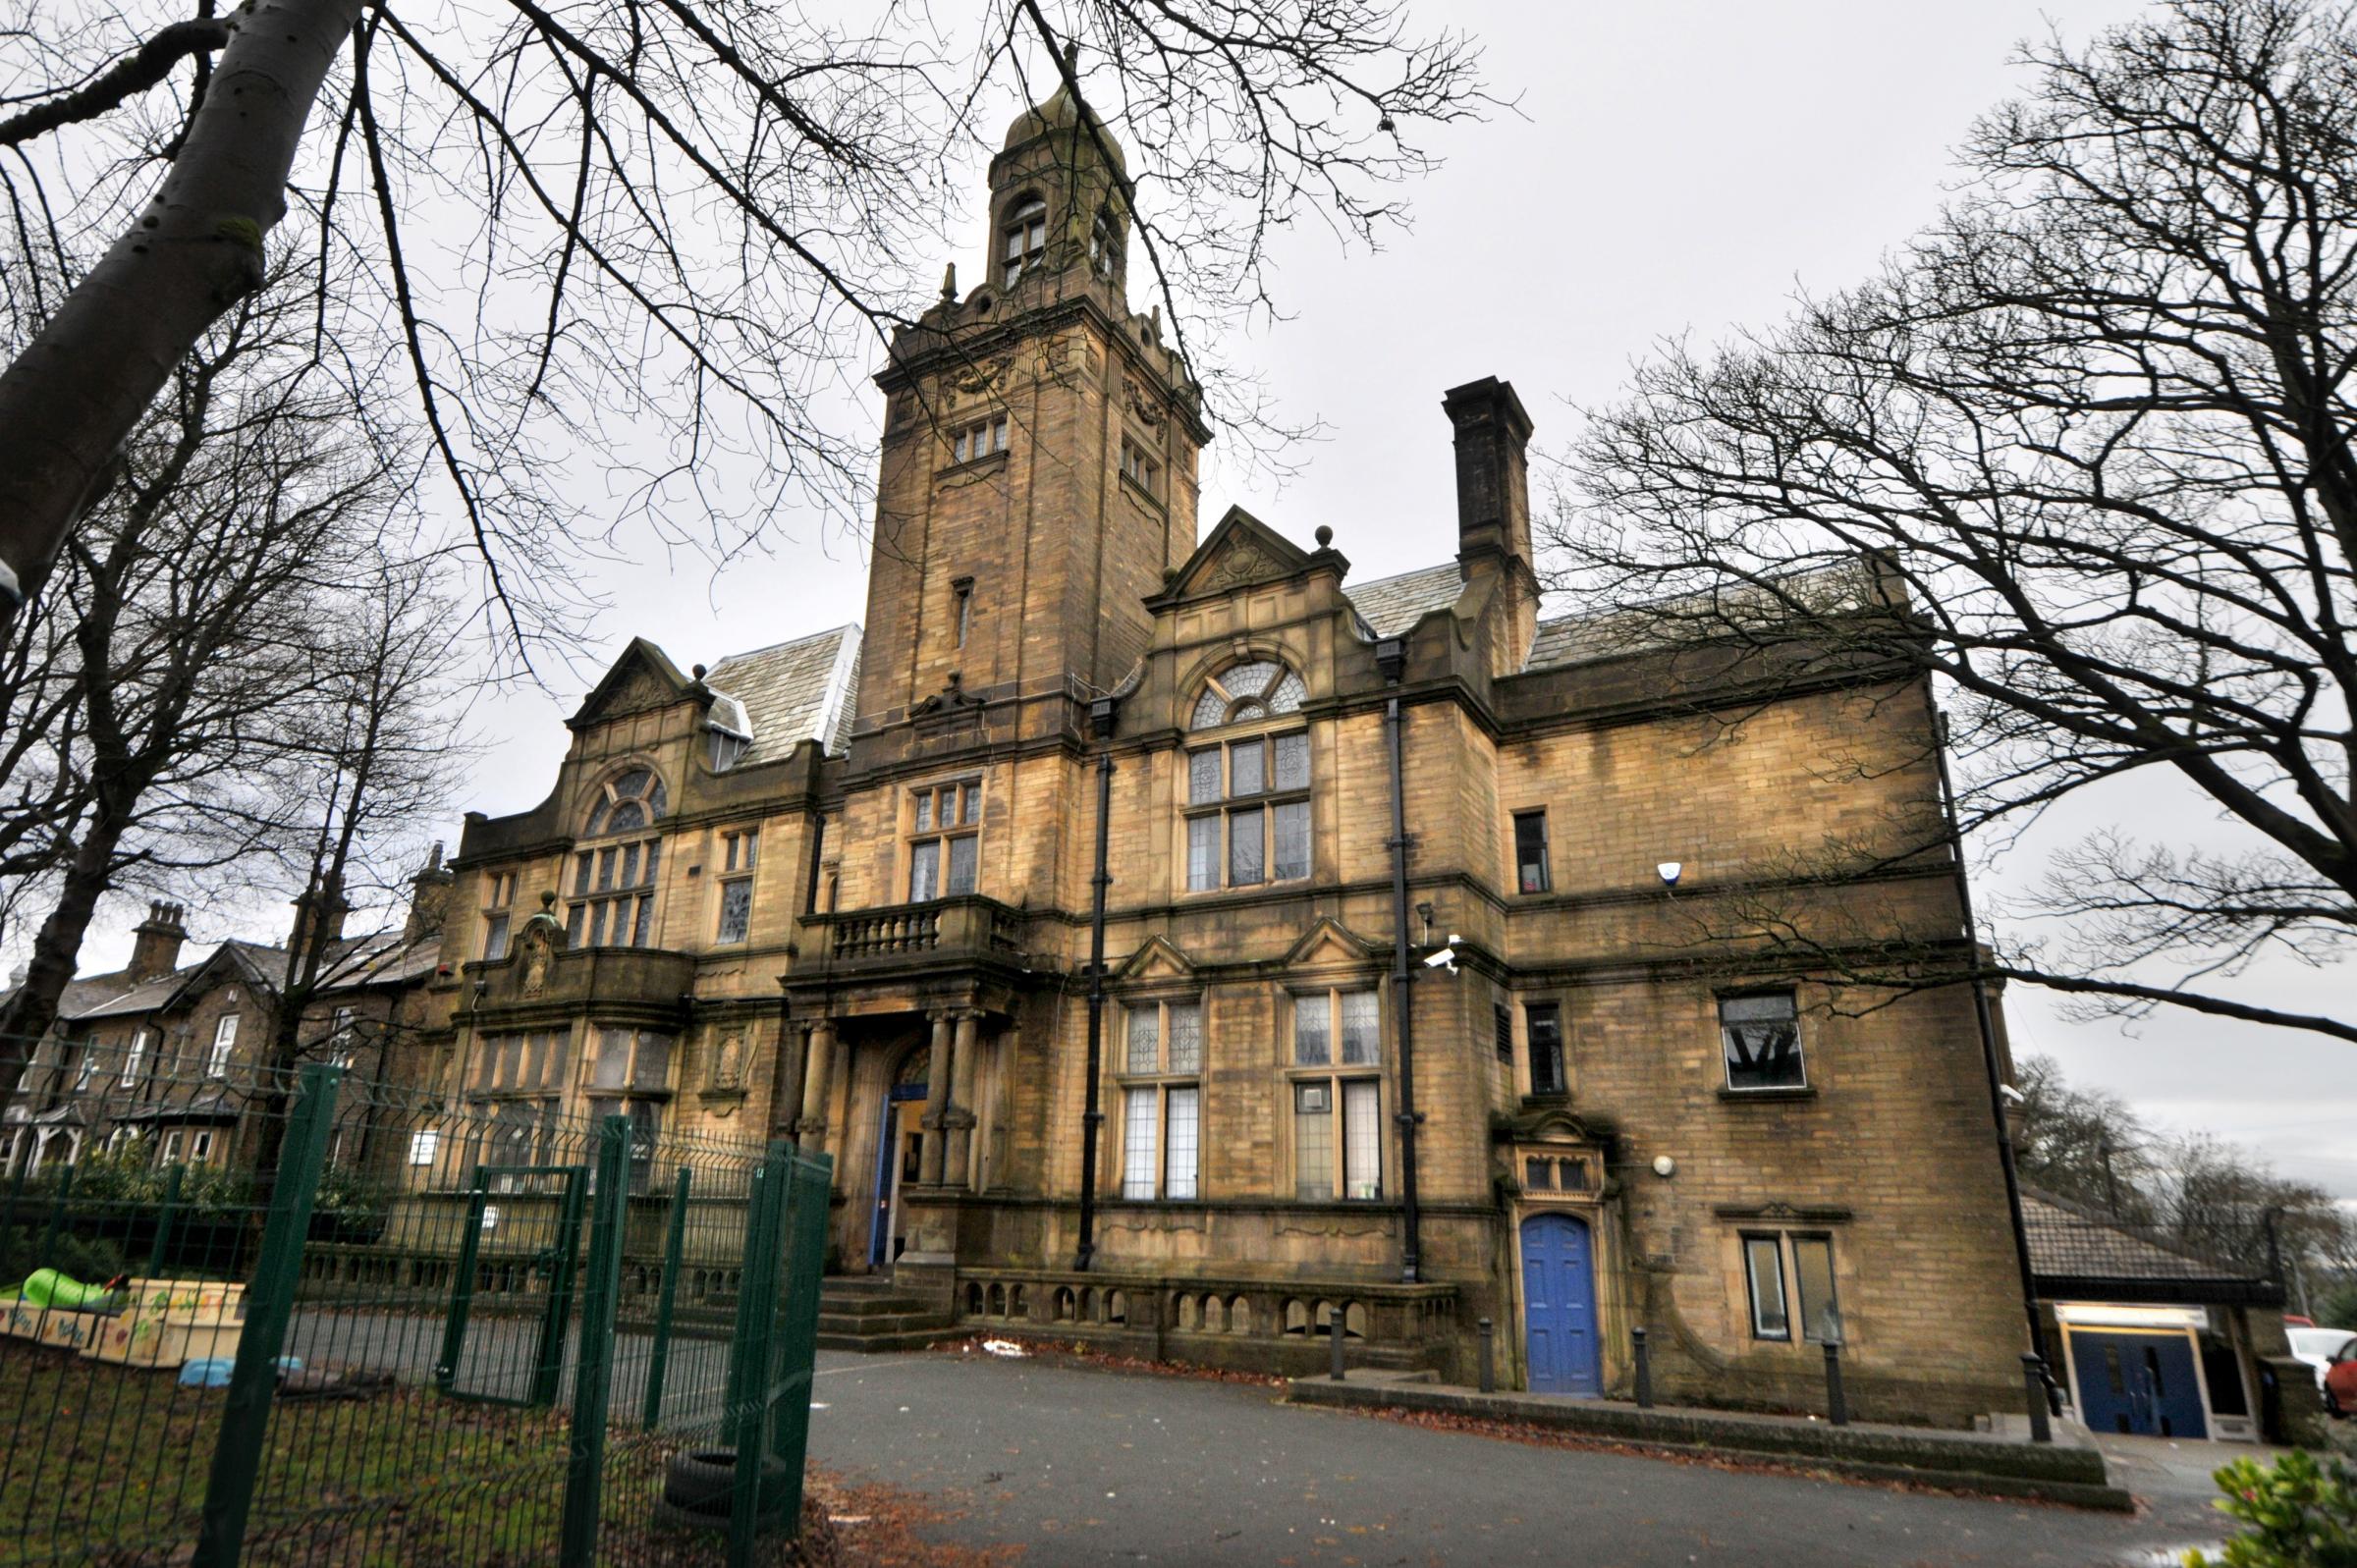 Community group in discussion with Bradford Council over Queensbury's Victoria Hall